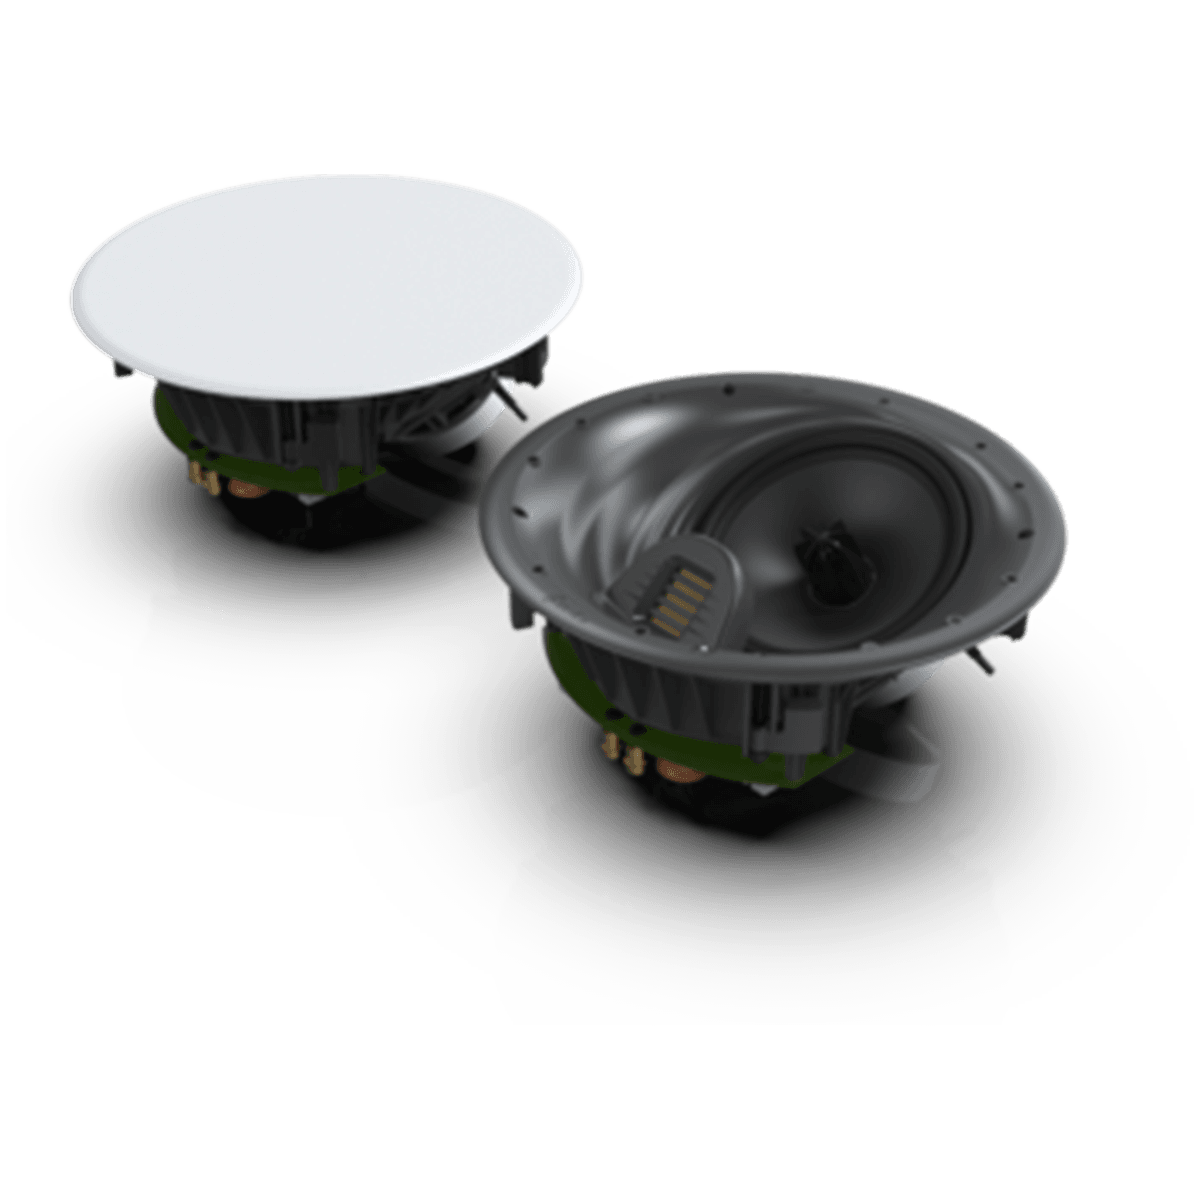 GoldenEar Invisa HTR 8000 In-Ceiling LCR Speaker, set of two, front view with grille on and grille off